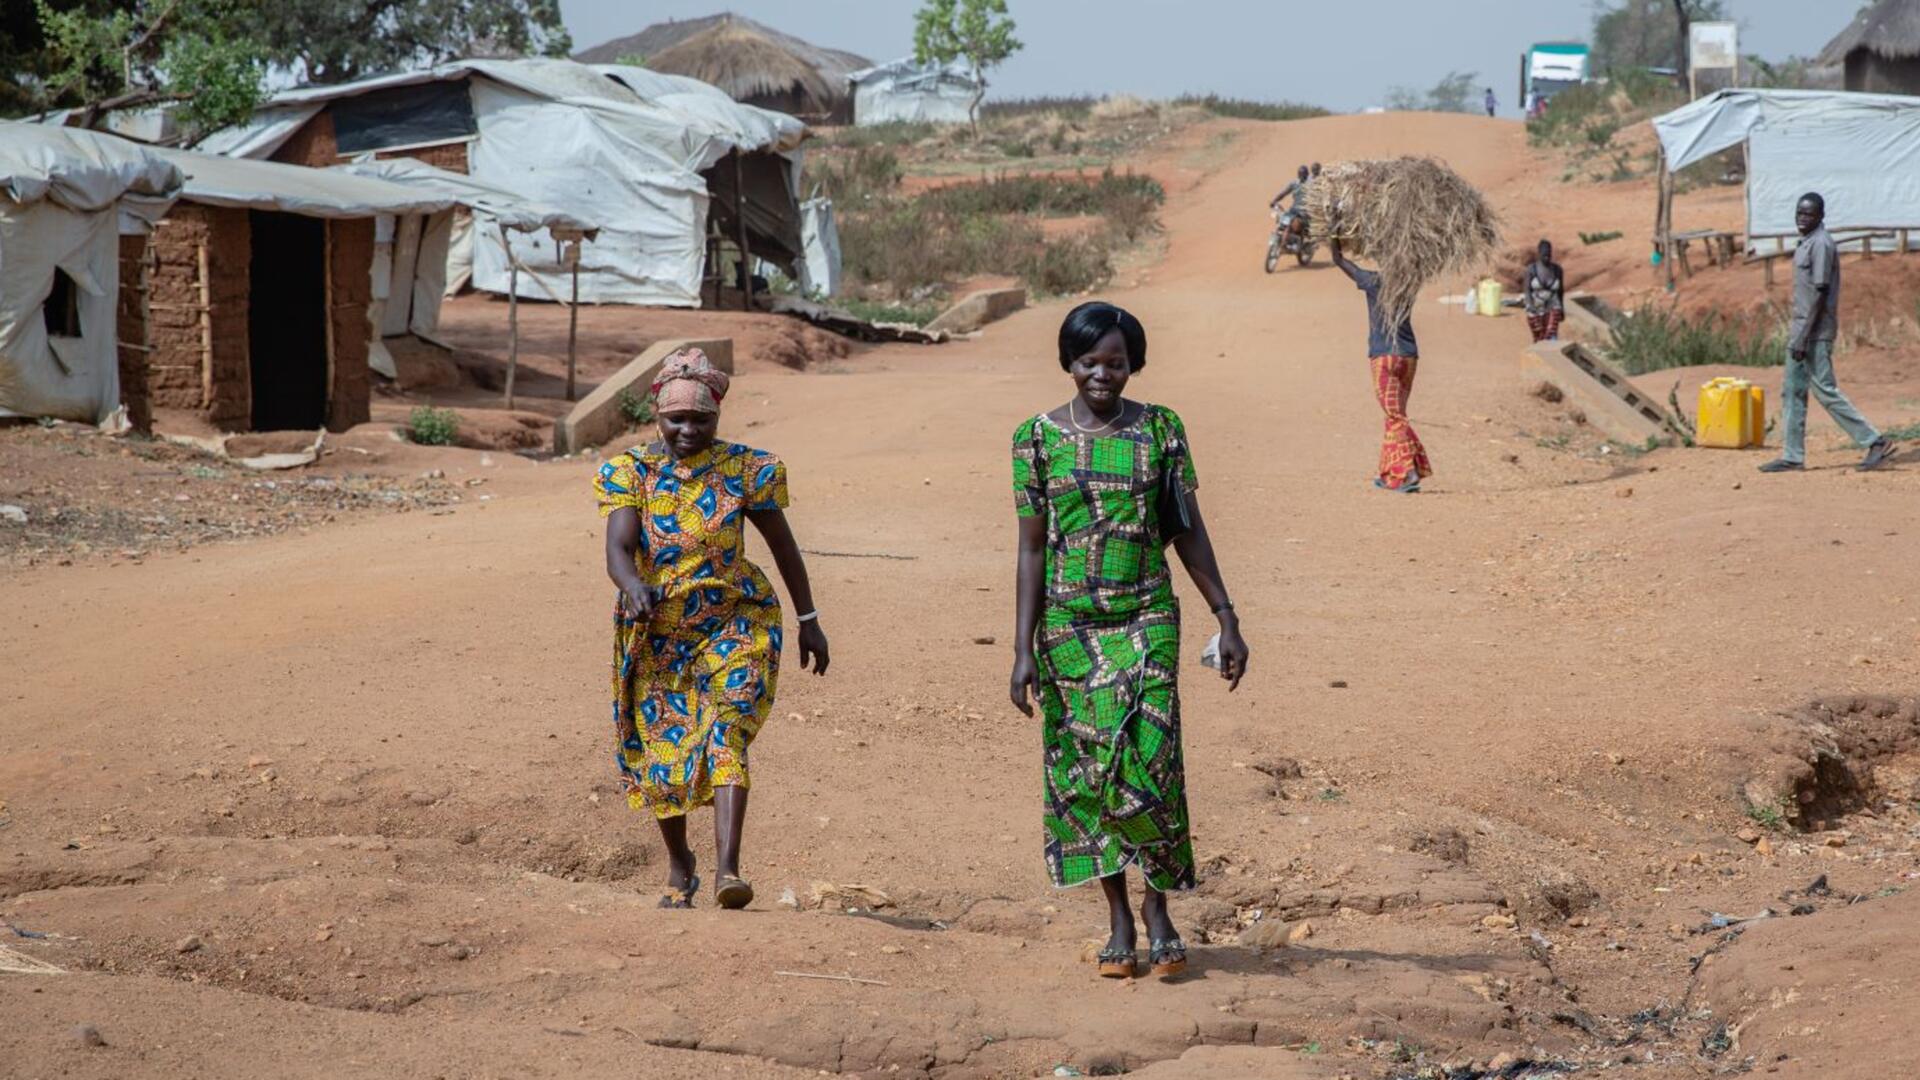 Women's rights activists Foni Grace and Loyce Tabu walk in Bidi Bidi refugeee settlement in Uganda.They are at the forefront of the photo and there are small makeshift homes and a man carrying a bale of hay behind them. 